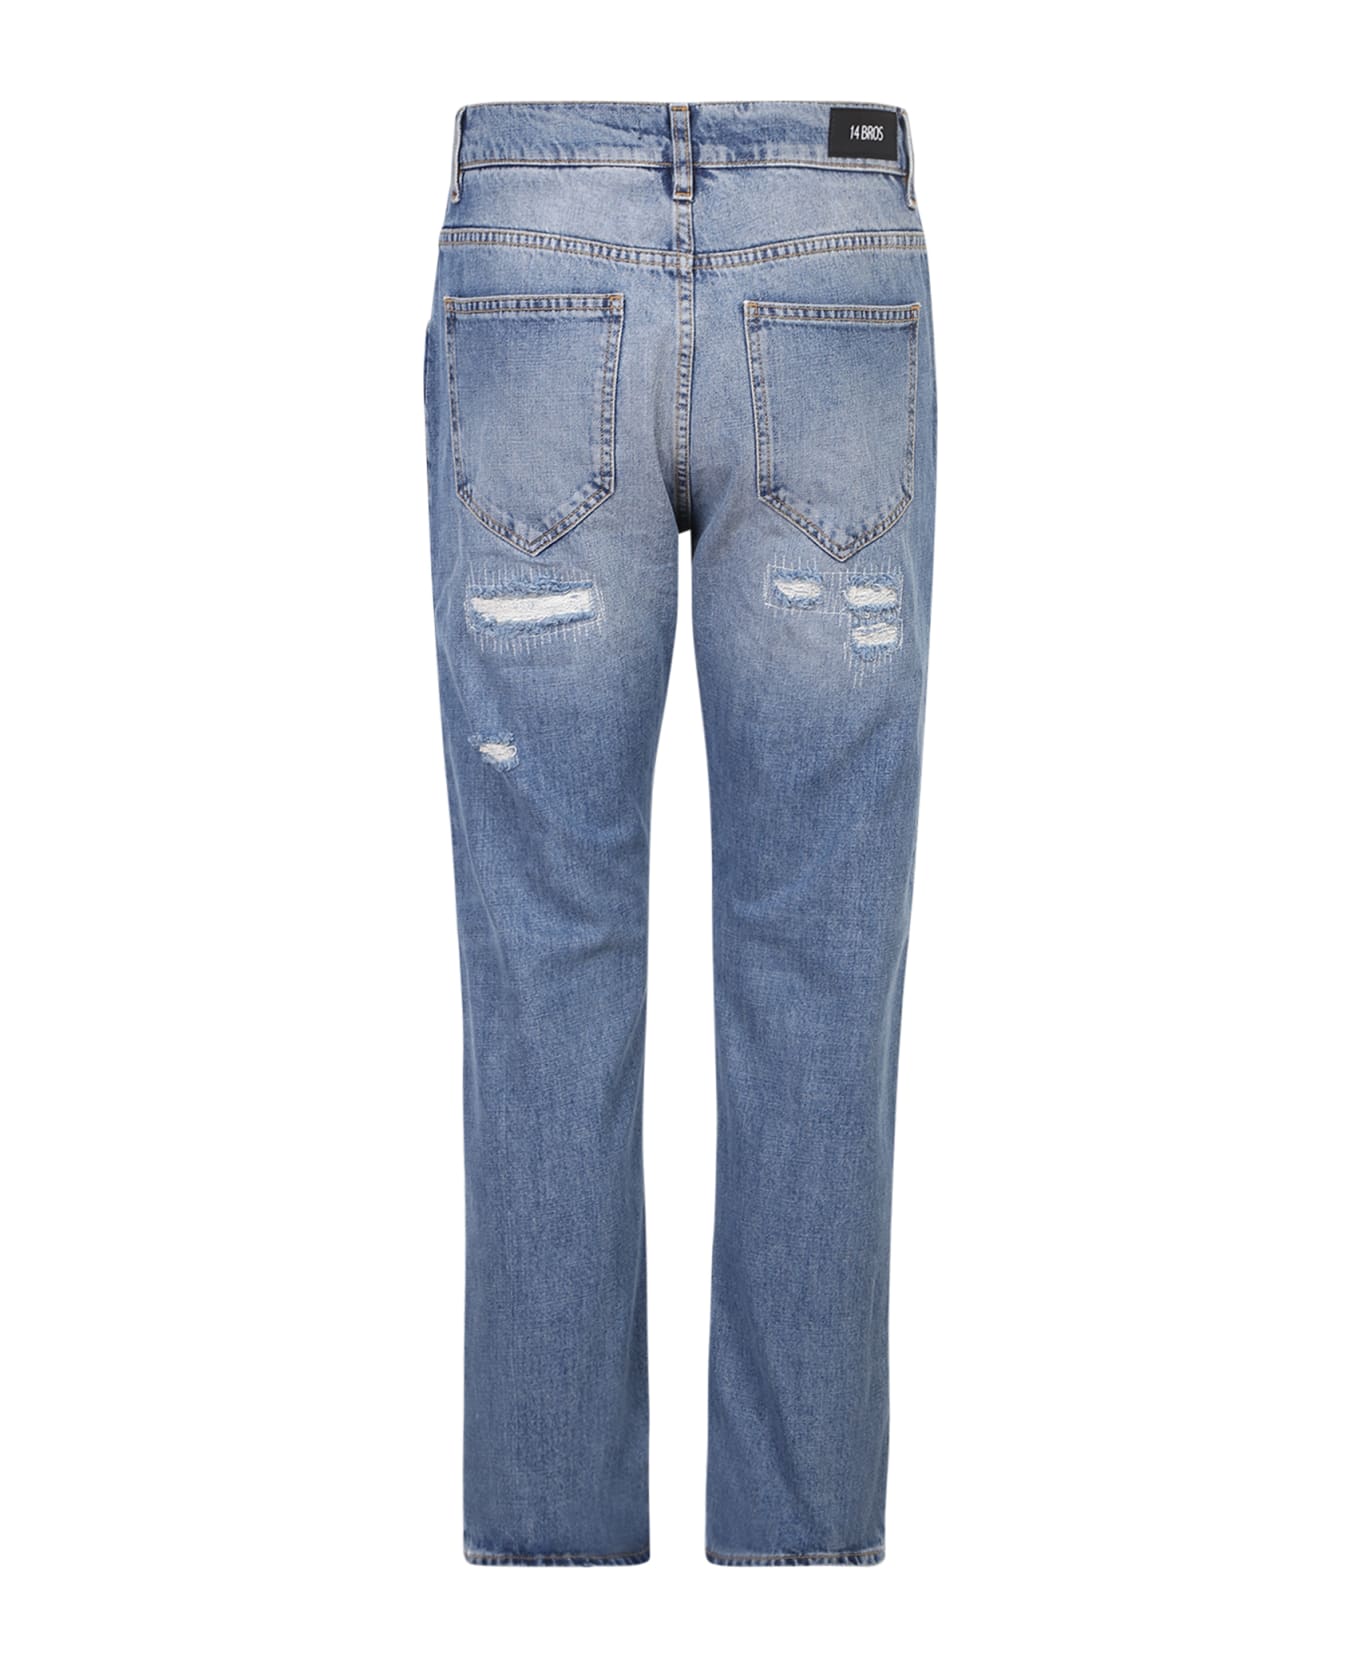 14 Bros Ripped Effect Jeans - Blue デニム